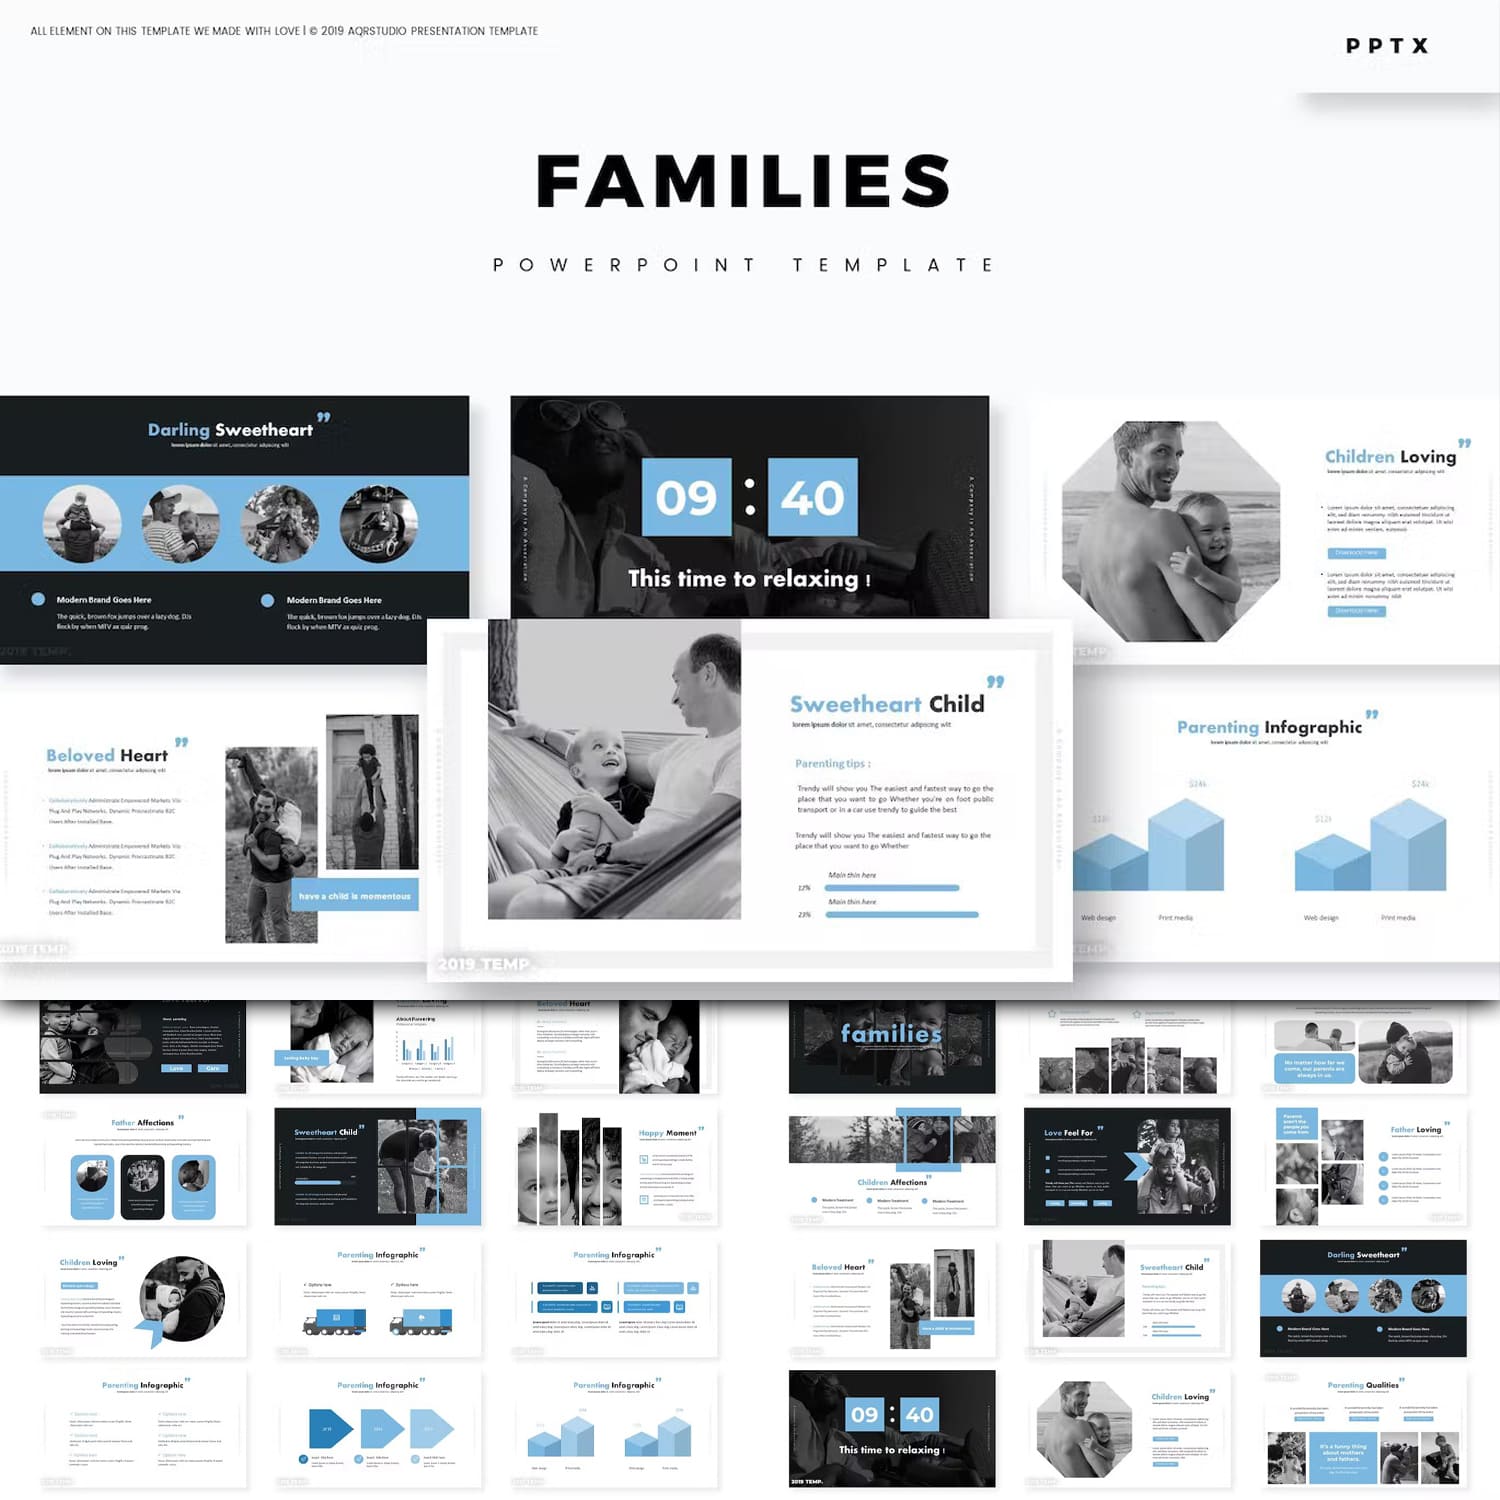 Families powerpoint template - main image preview.